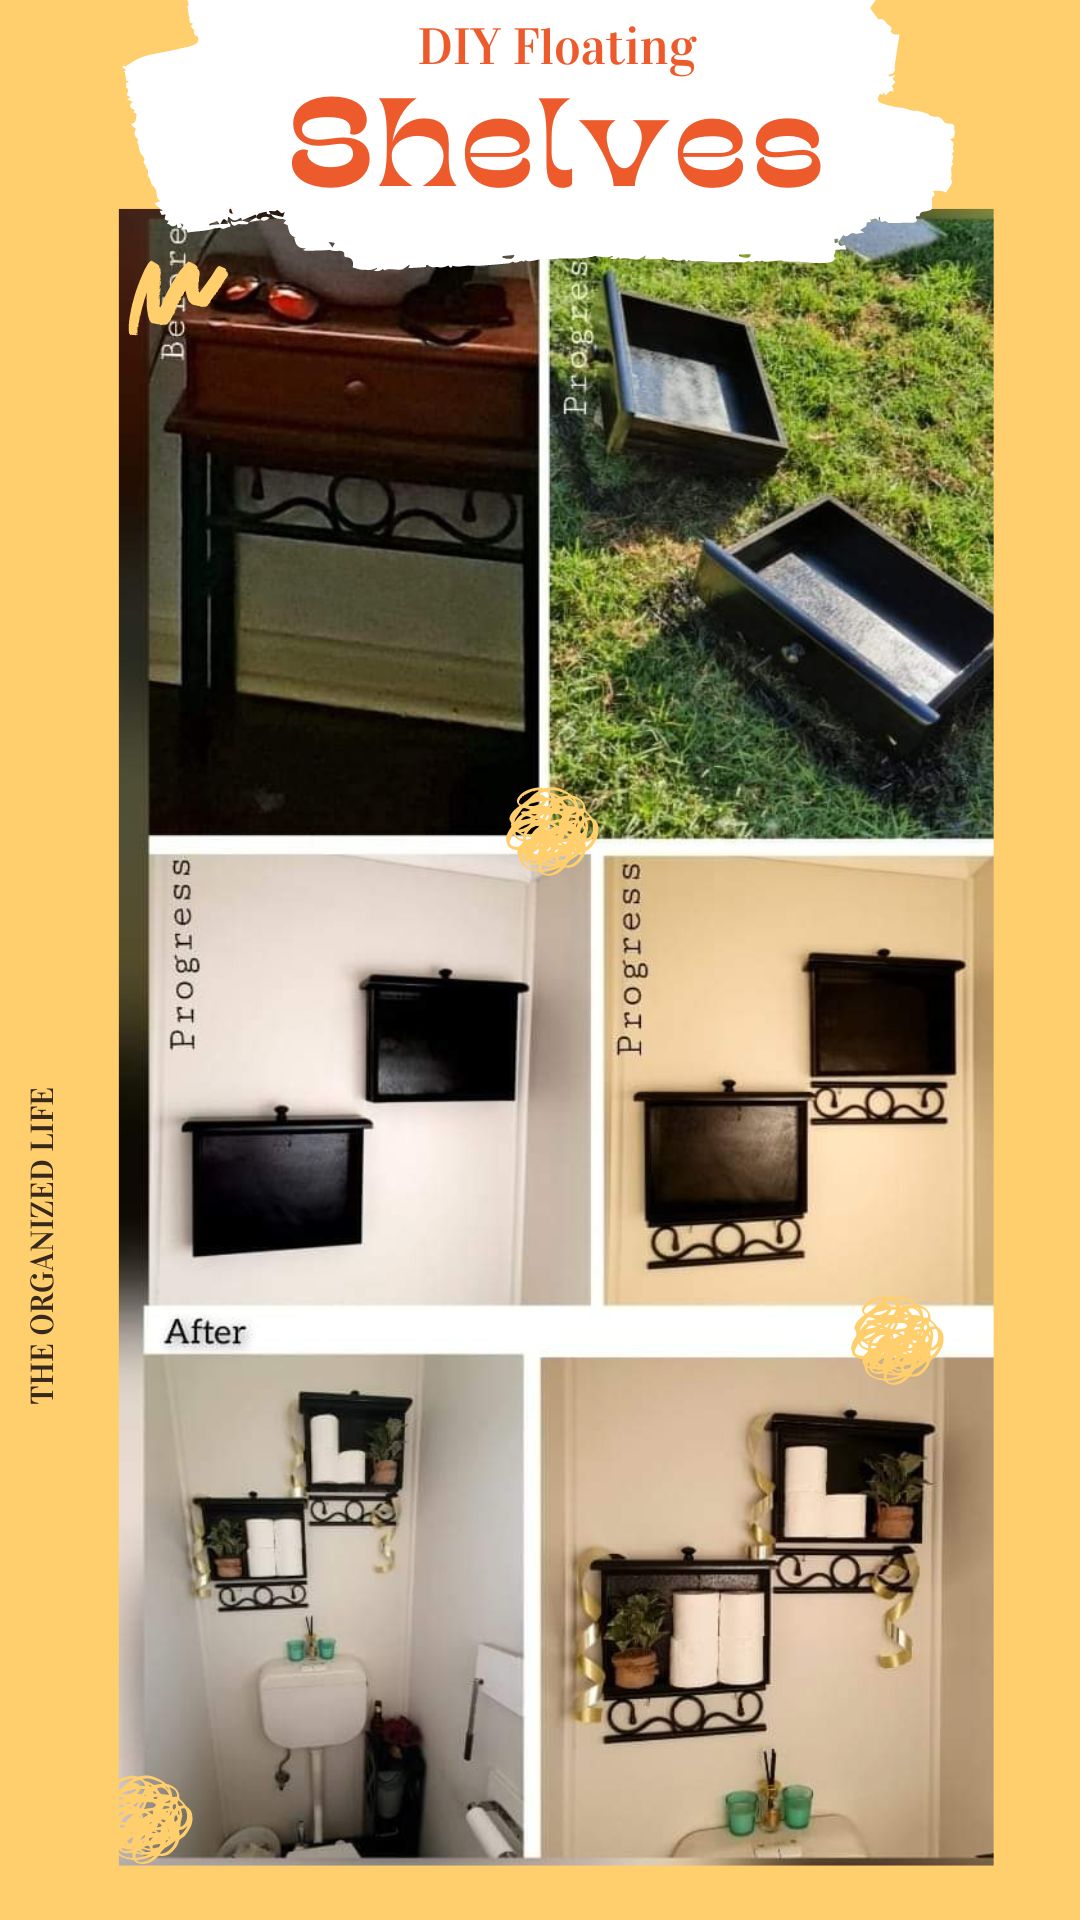 How to convert old console drawers into DIY Floating shelves